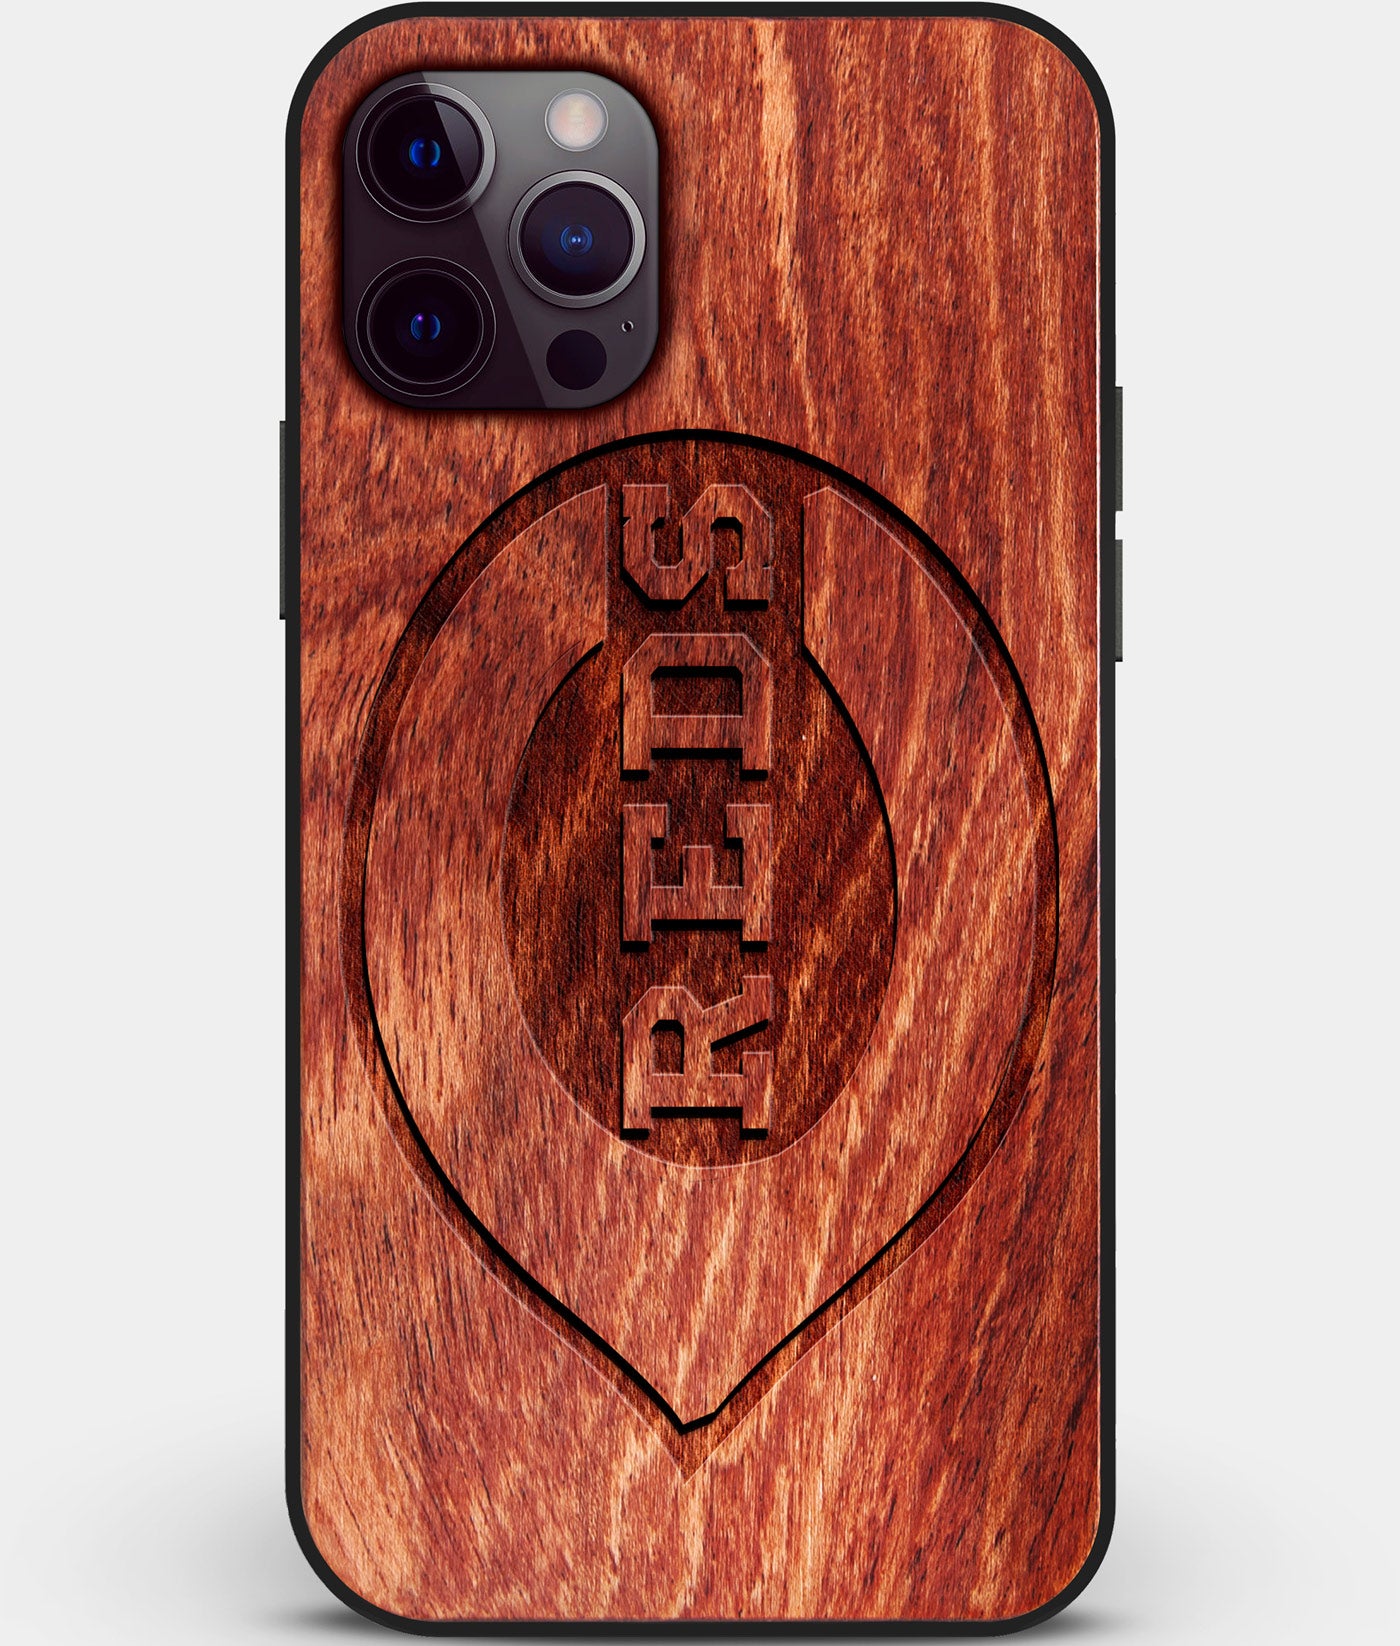 Custom Carved Wood Cincinnati Reds iPhone 12 Pro Max Case | Personalized Mahogany Wood Cincinnati Reds Cover, Birthday Gift, Gifts For Him, Monogrammed Gift For Fan | by Engraved In Nature